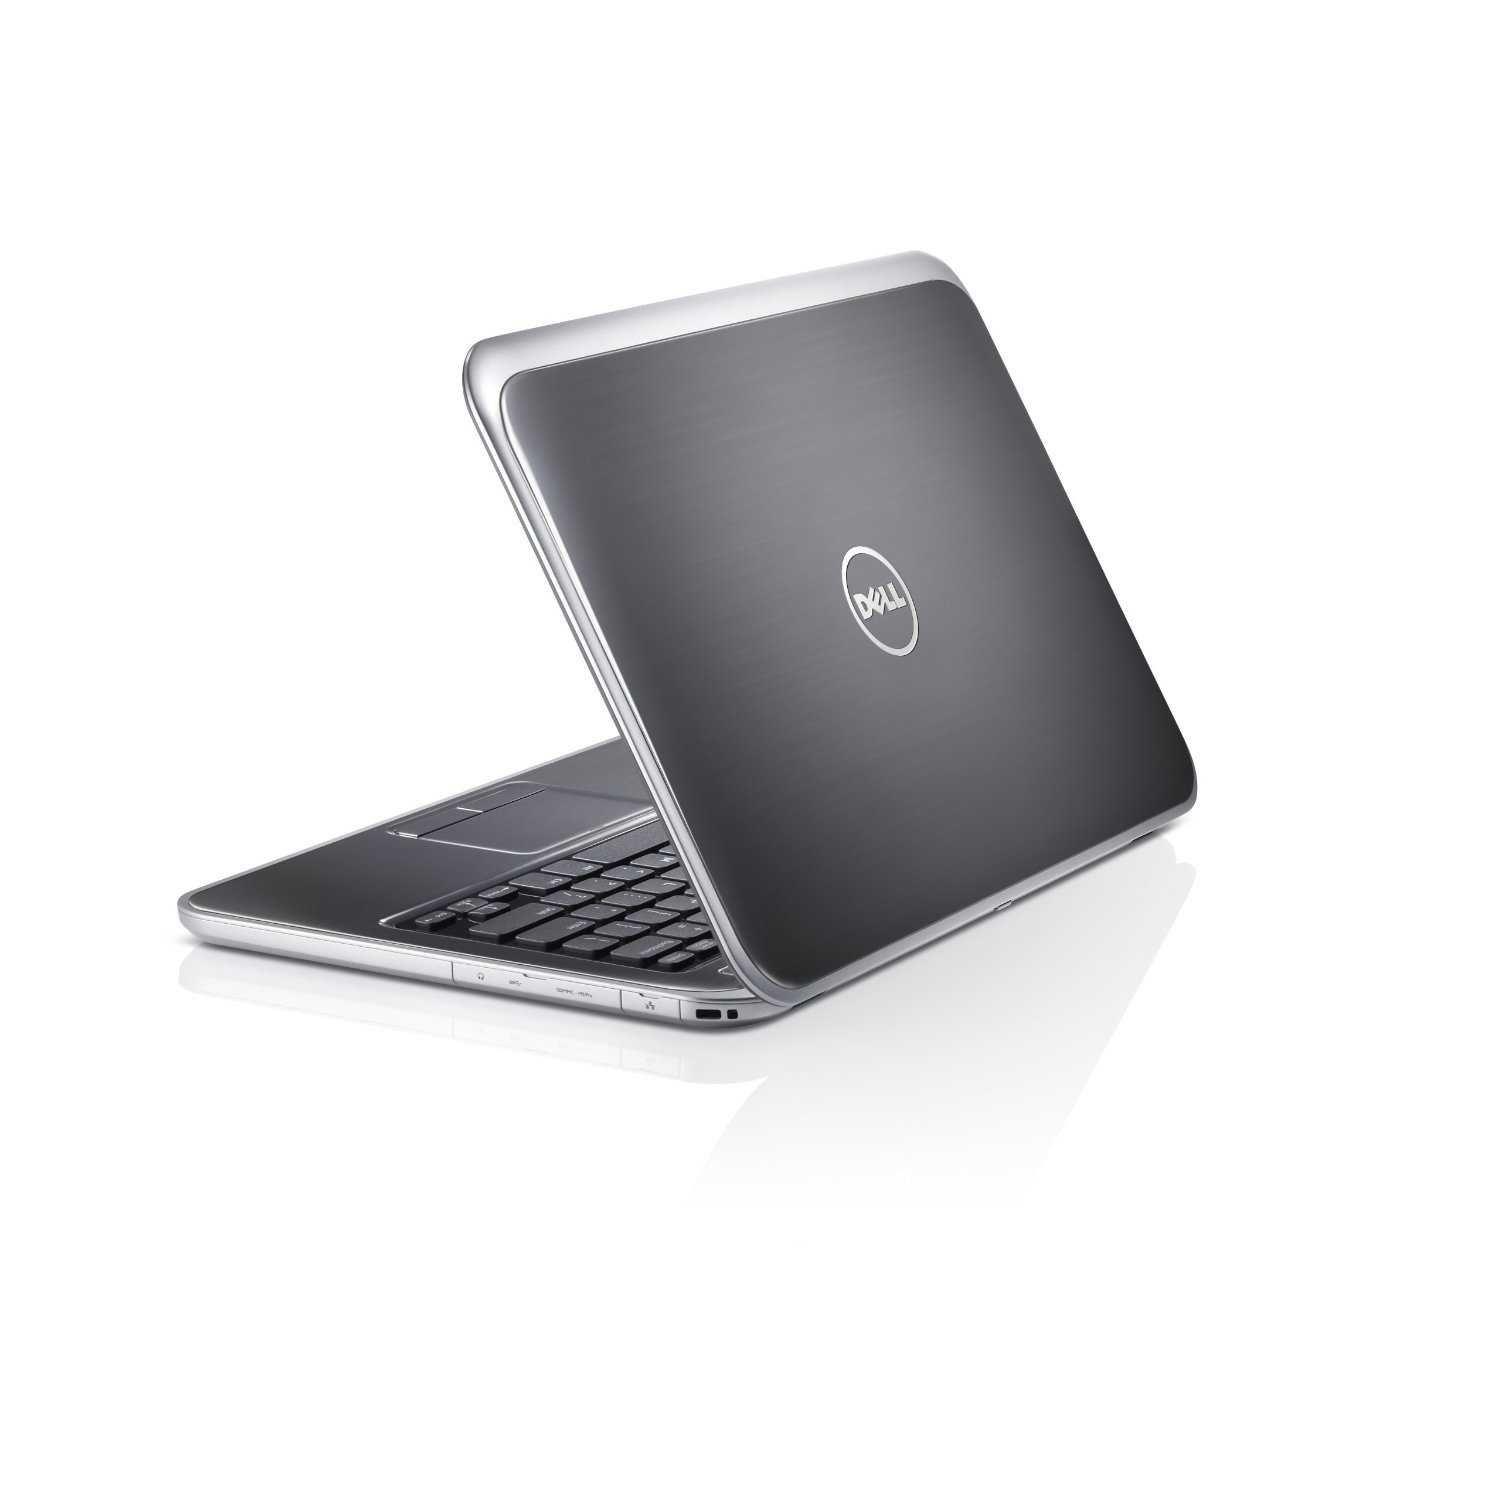 http://thetechjournal.com/wp-content/uploads/images/1210/1349897573-dell-inspiron-13z-13inch-laptop-4.jpg